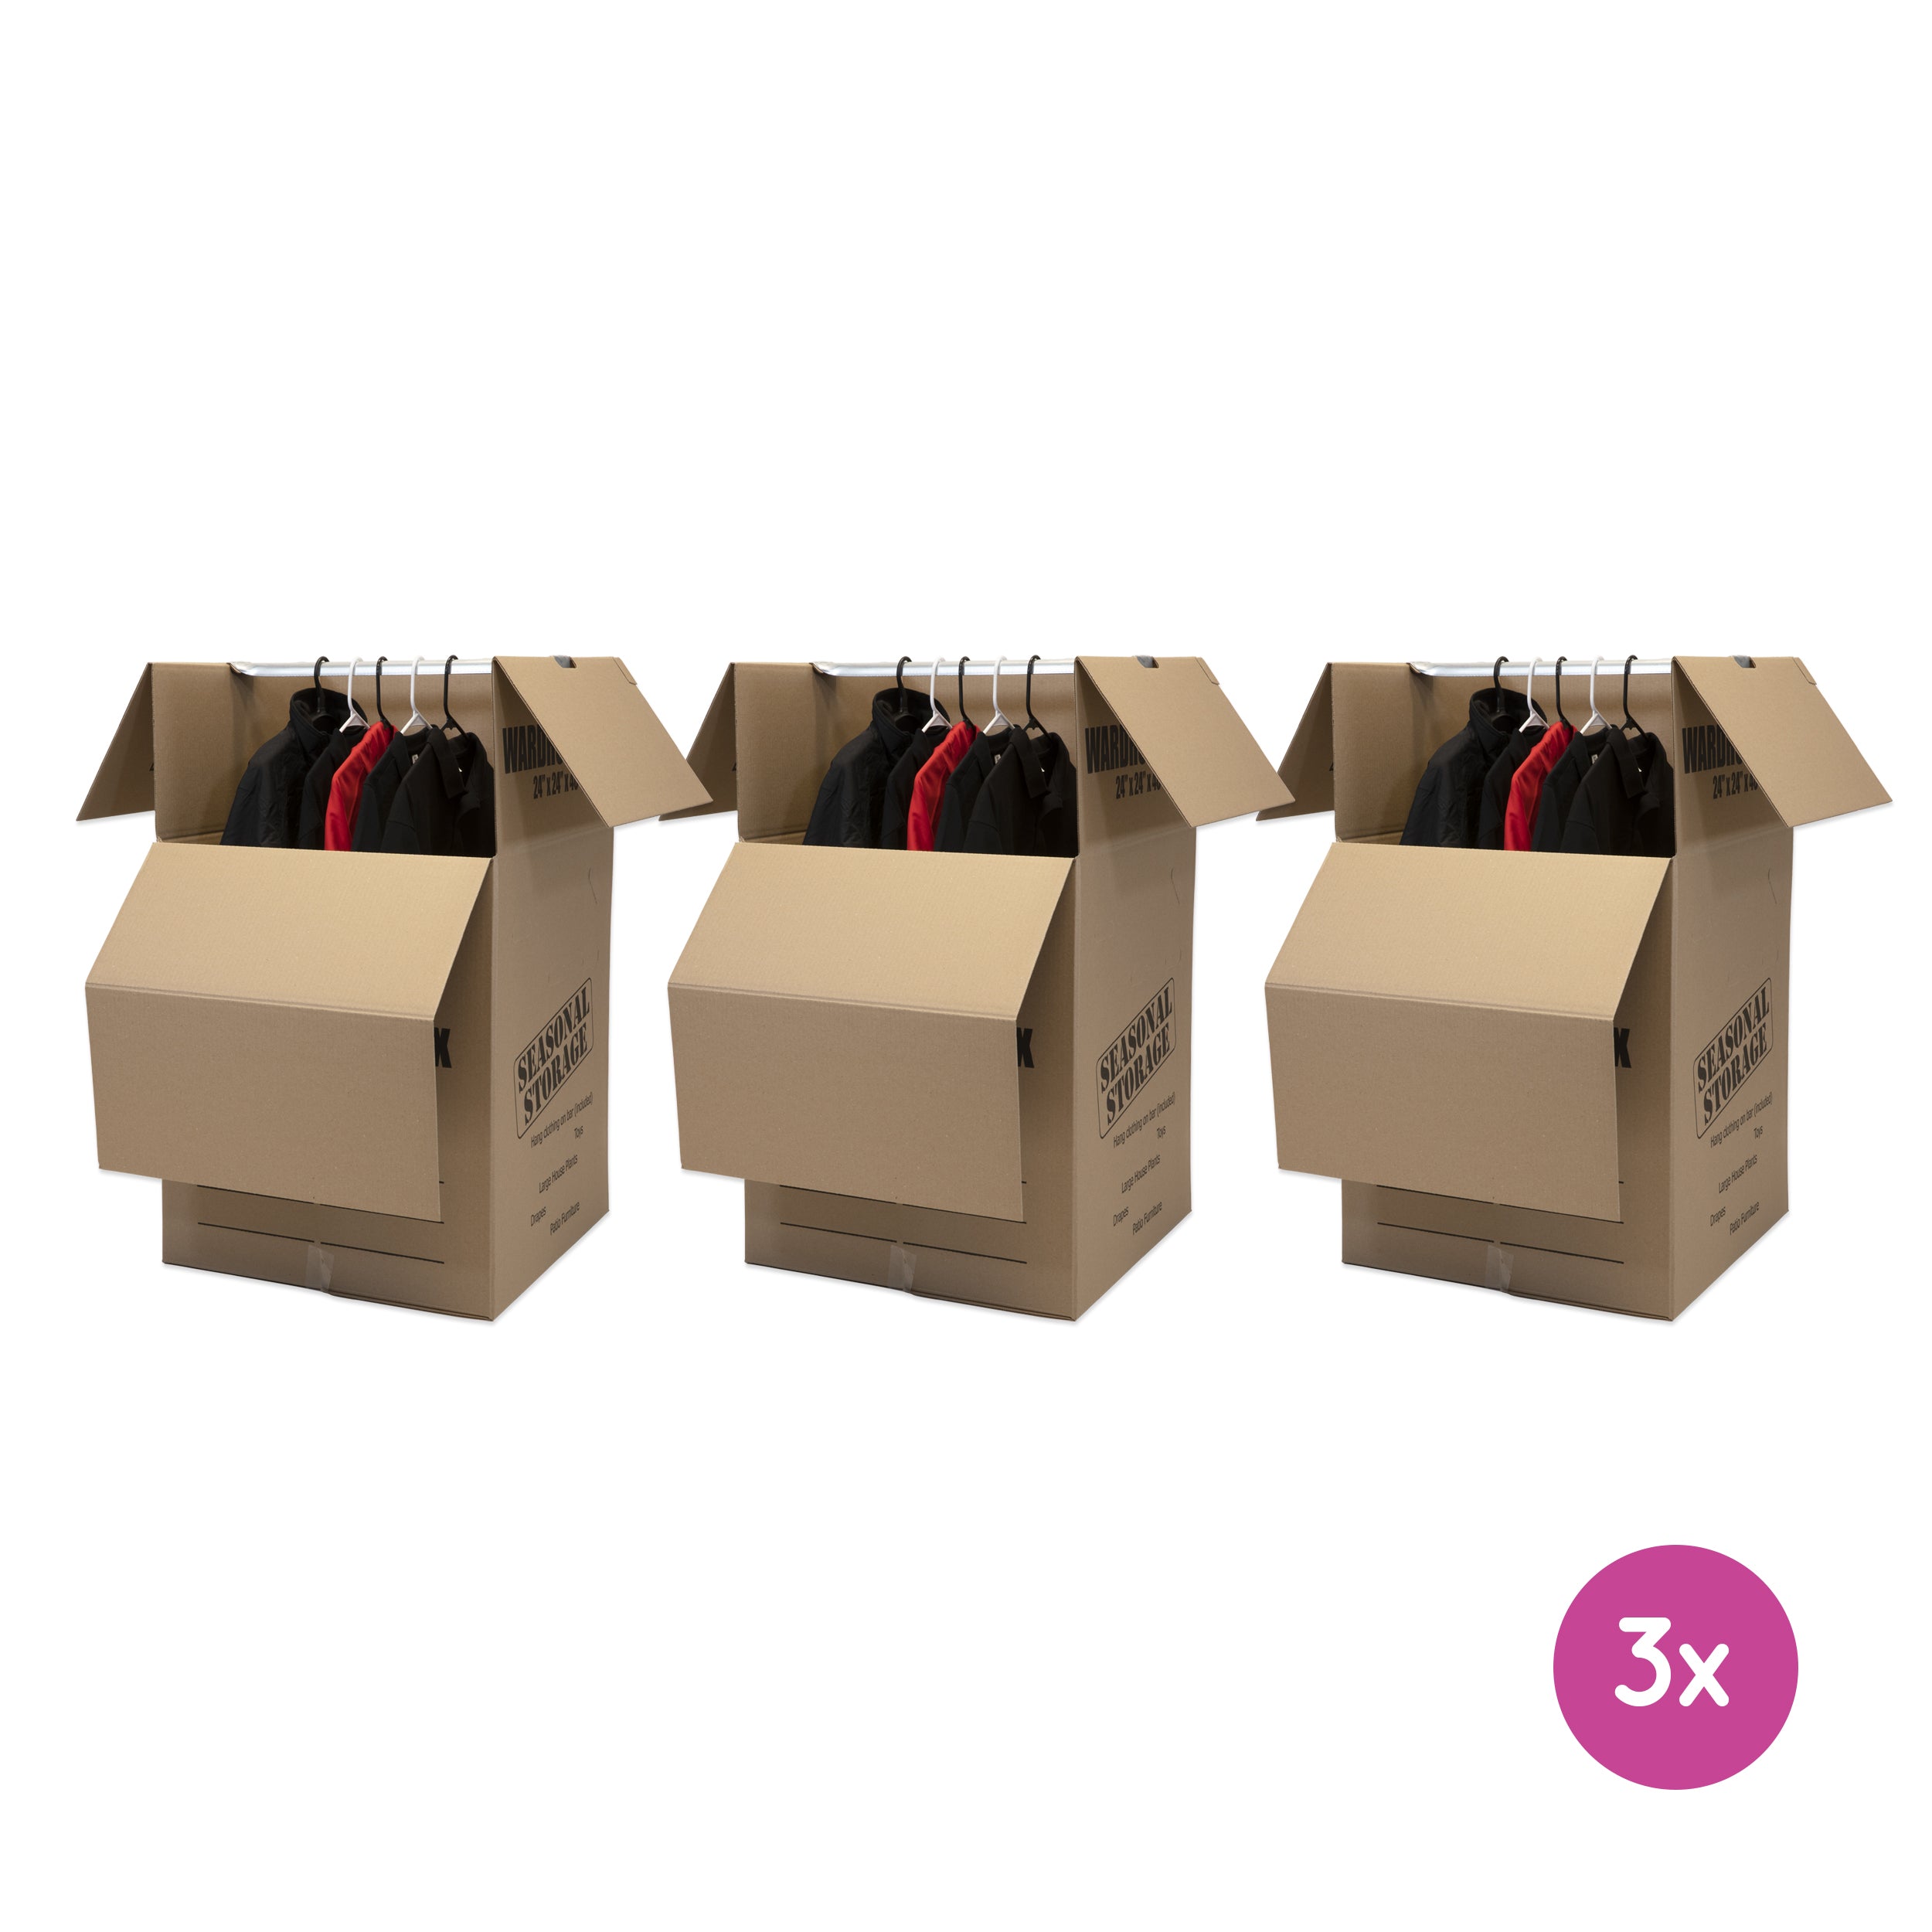 Wardrobe Boxes with Hanger Bars - 3 Boxes/Case